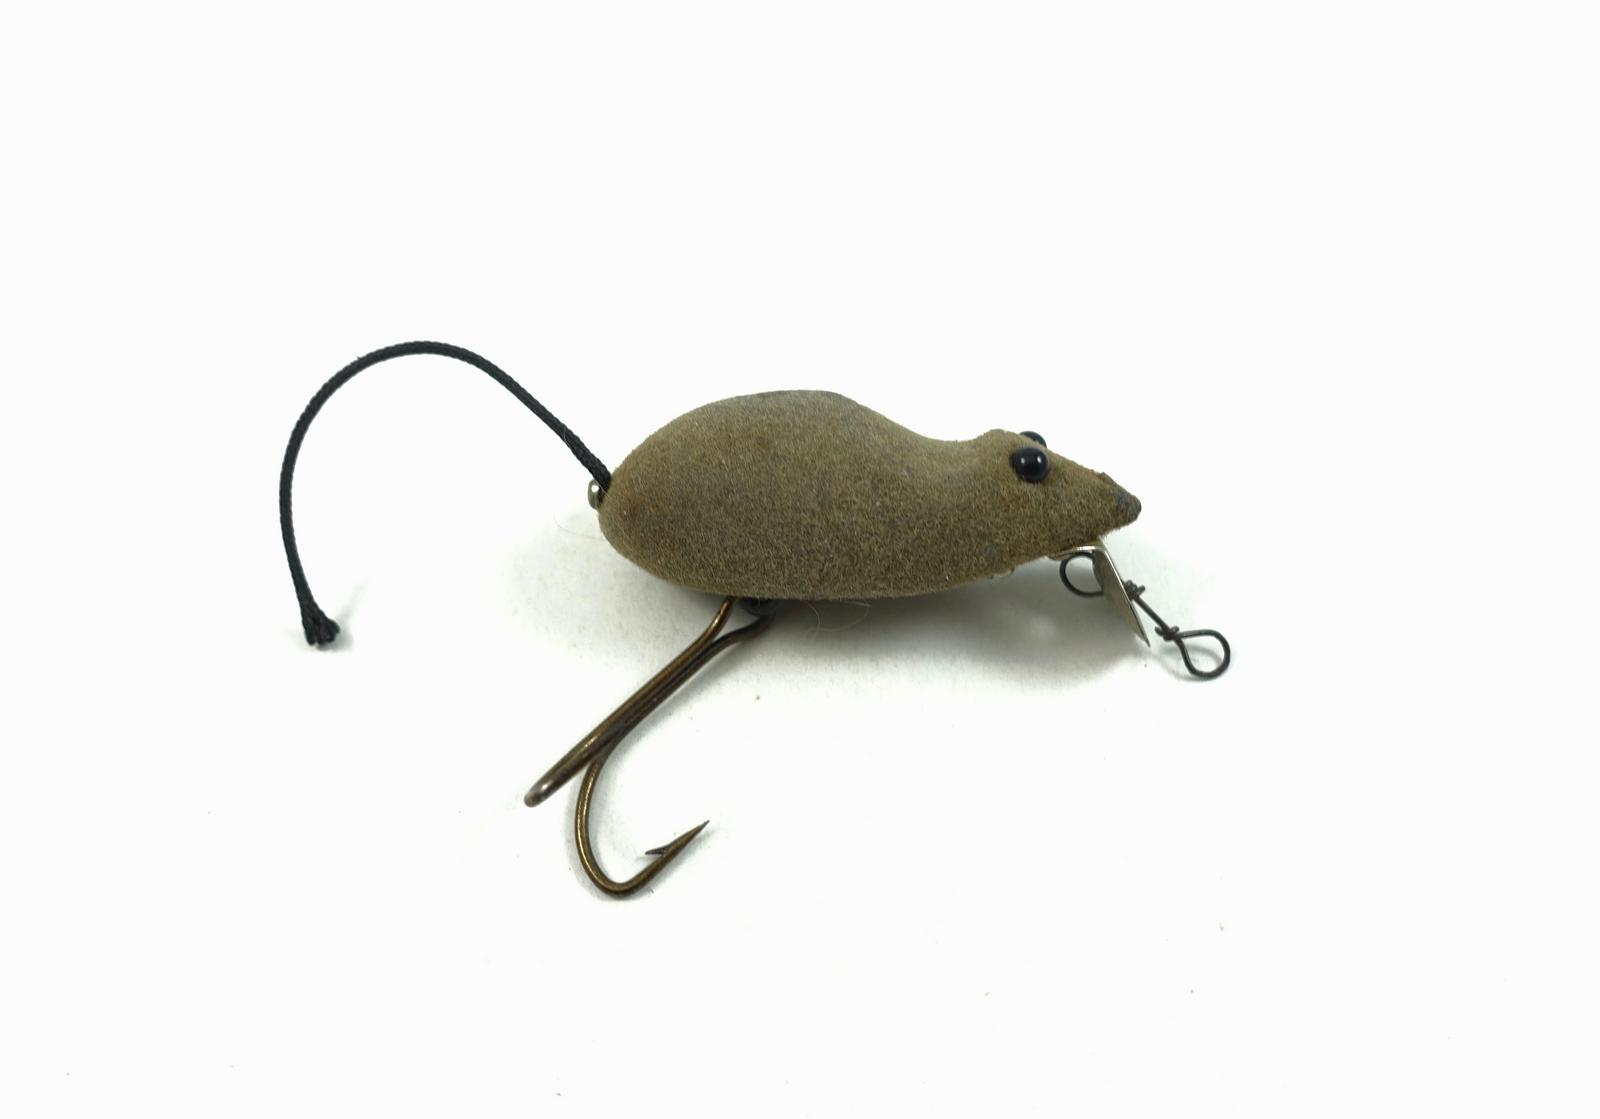 Sold at Auction: PAW PAW MOUSE FISHING LURE